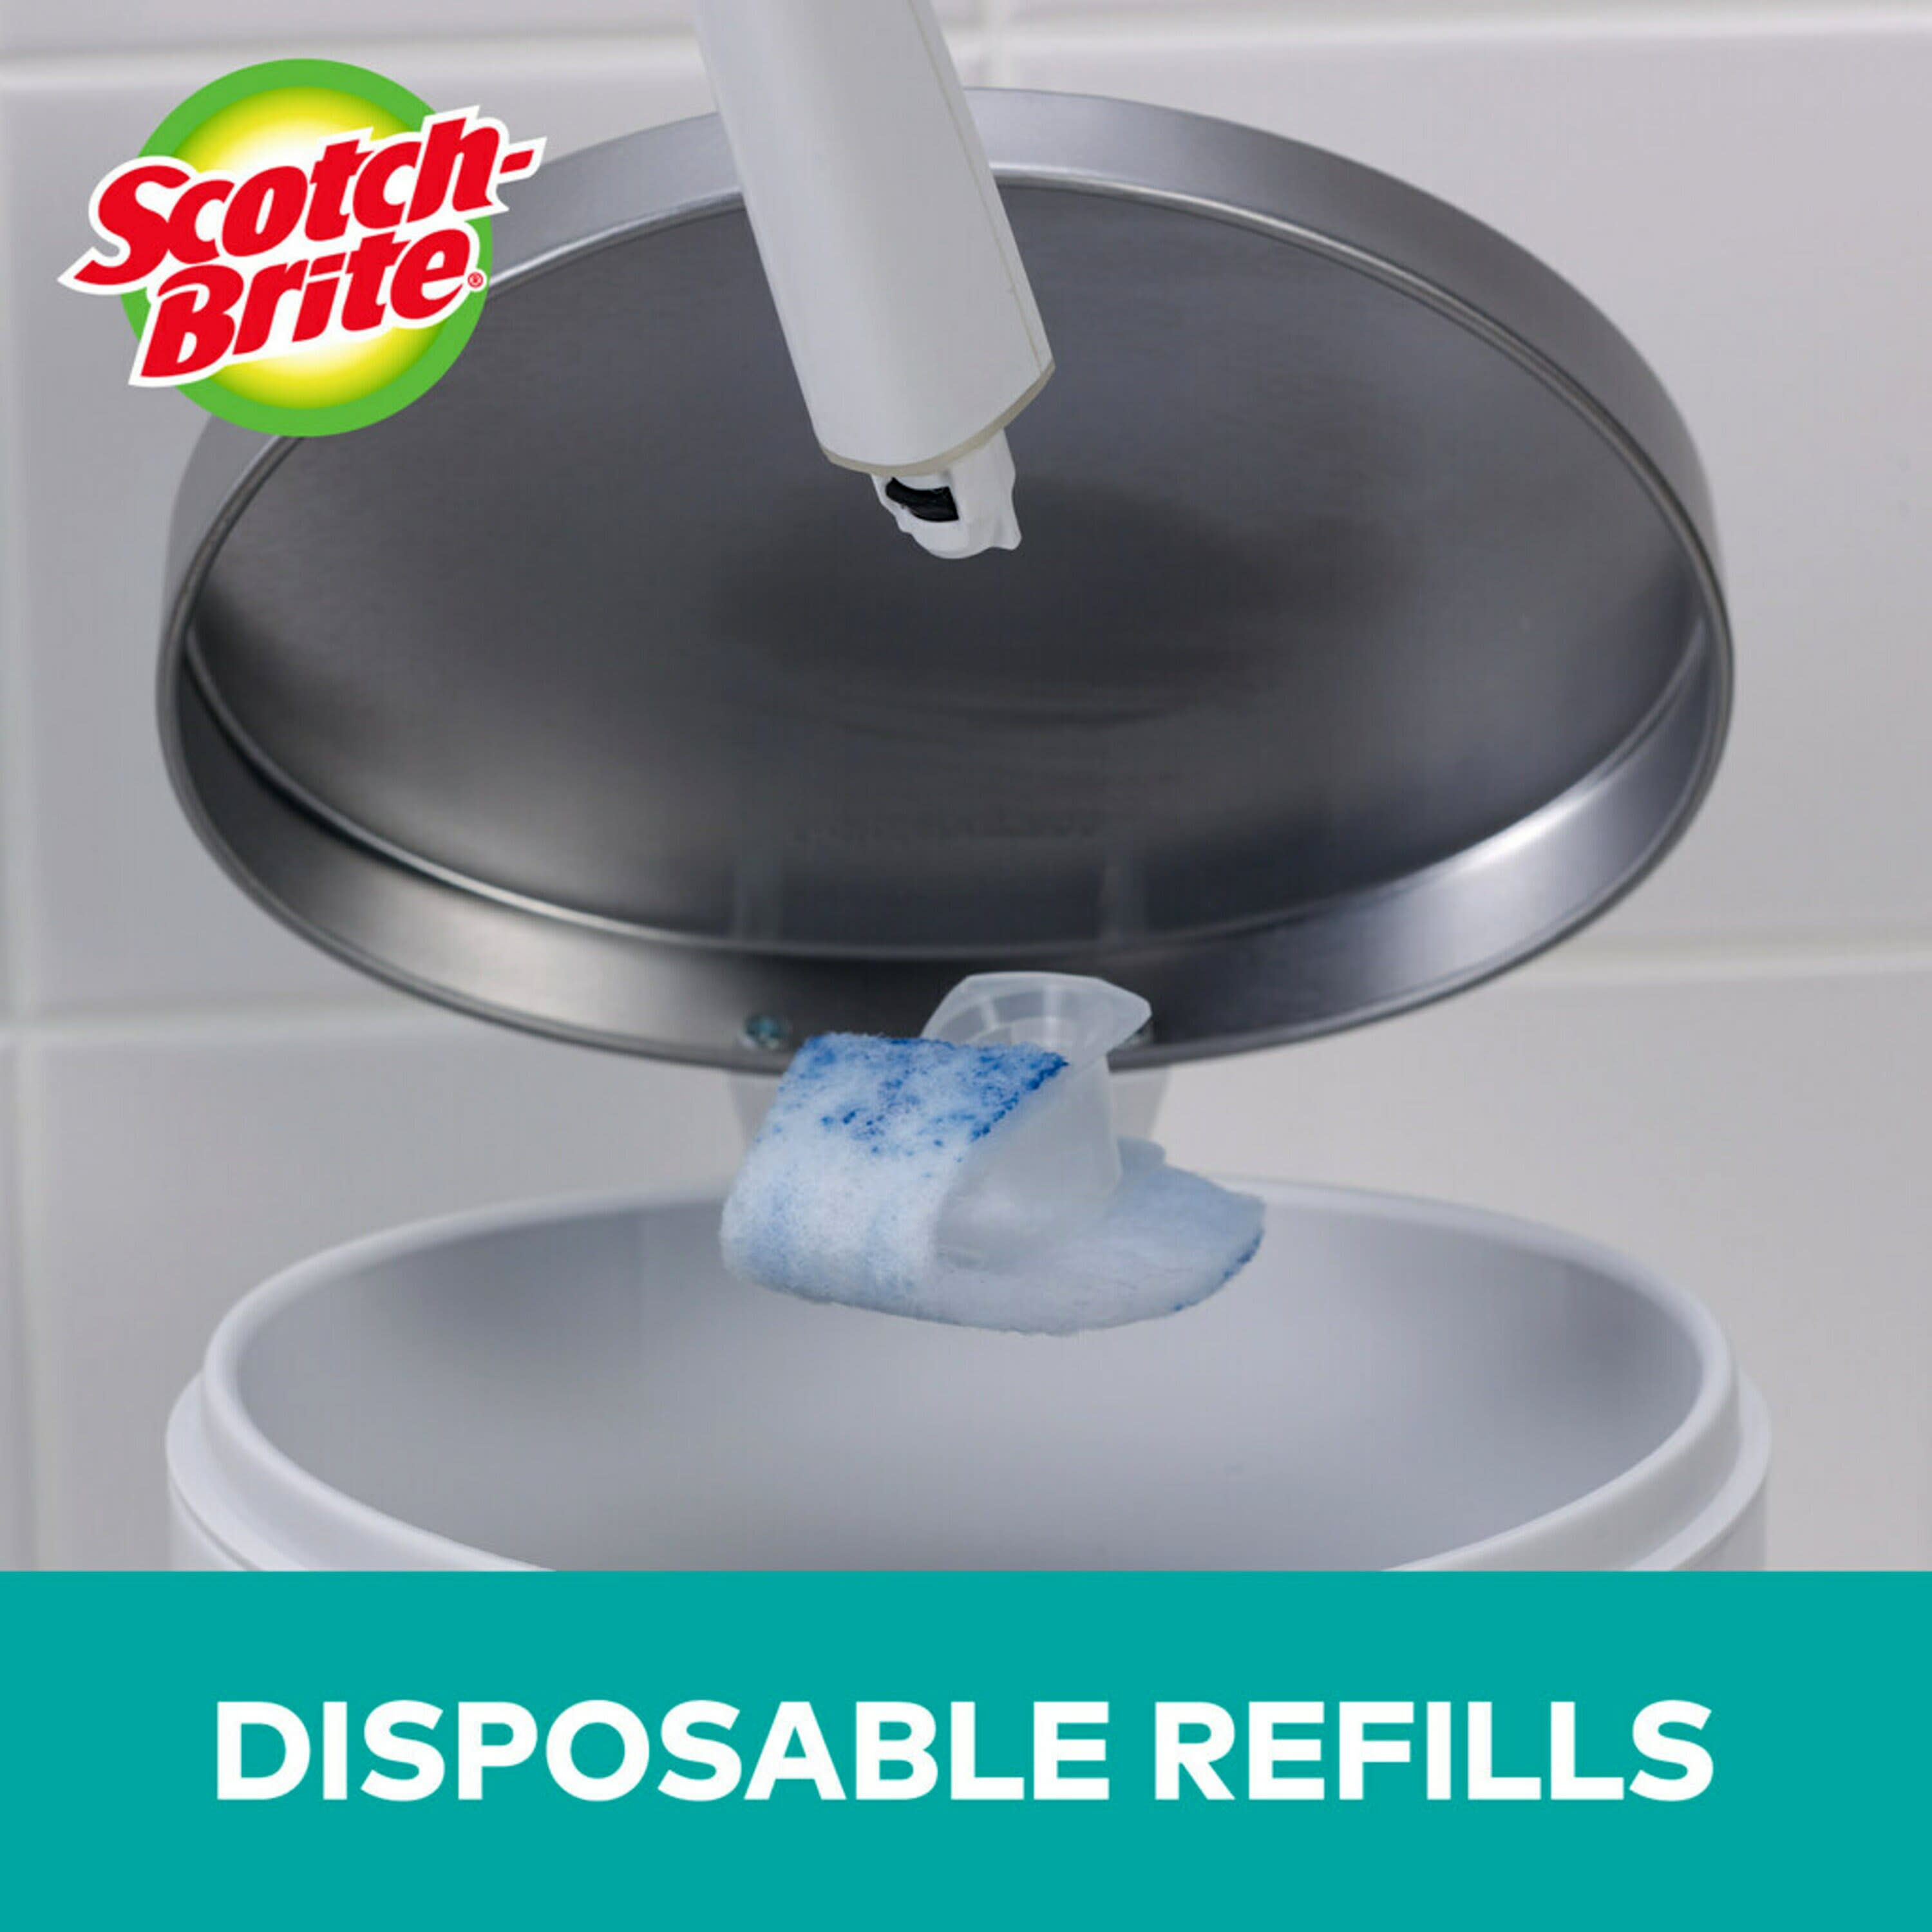 Scotch-Brite 12-Pack Fresh Toilet Bowl Cleaner in the Toilet Bowl